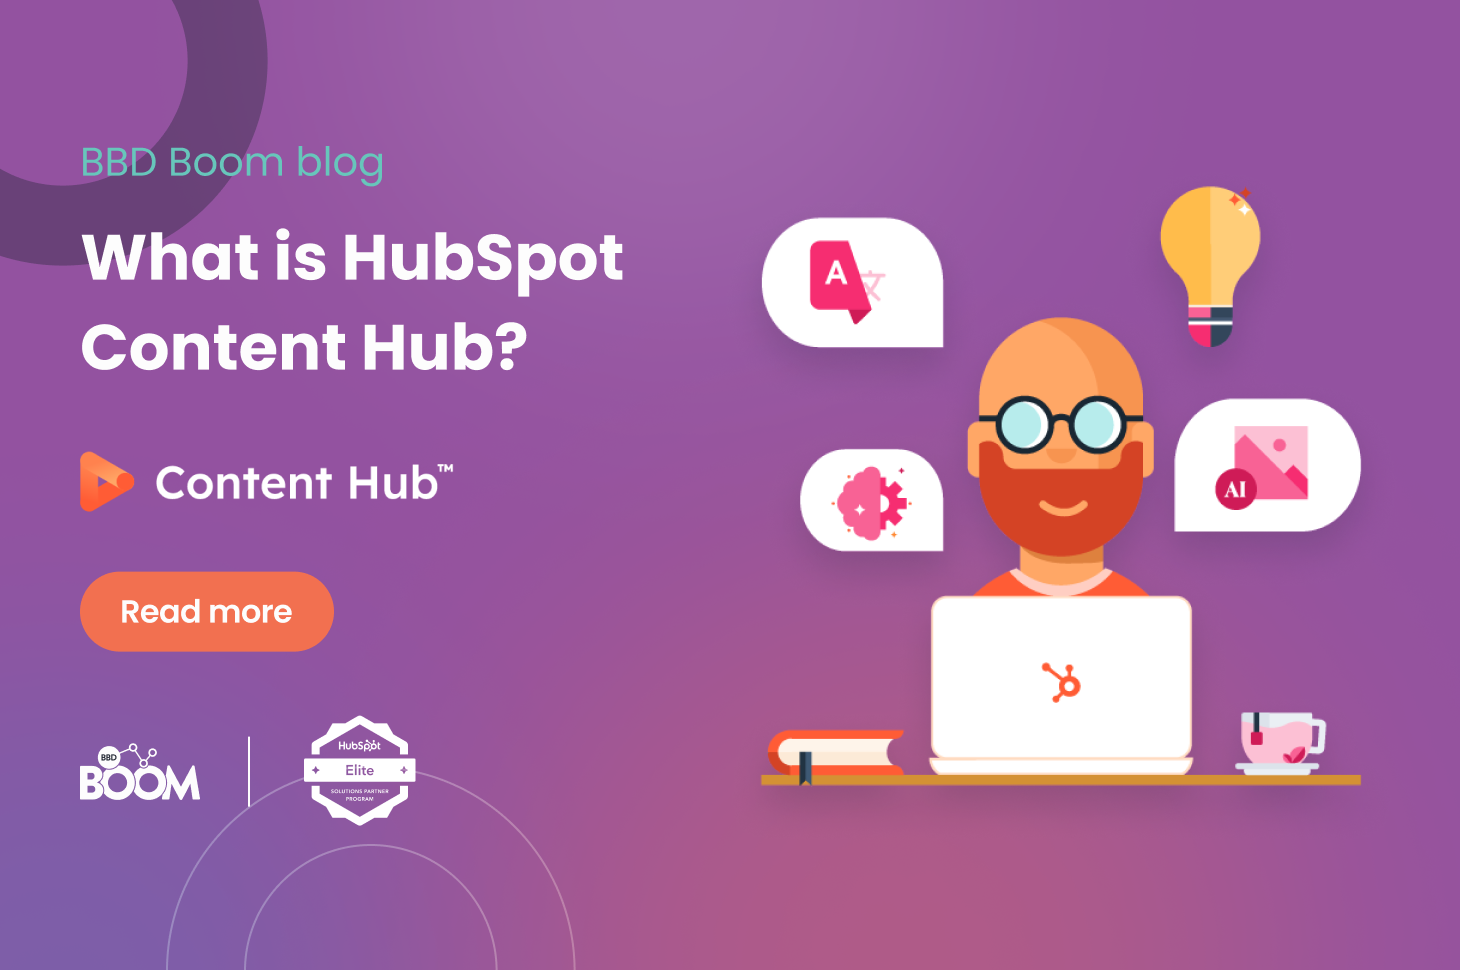 What Is HubSpot Content Hub?